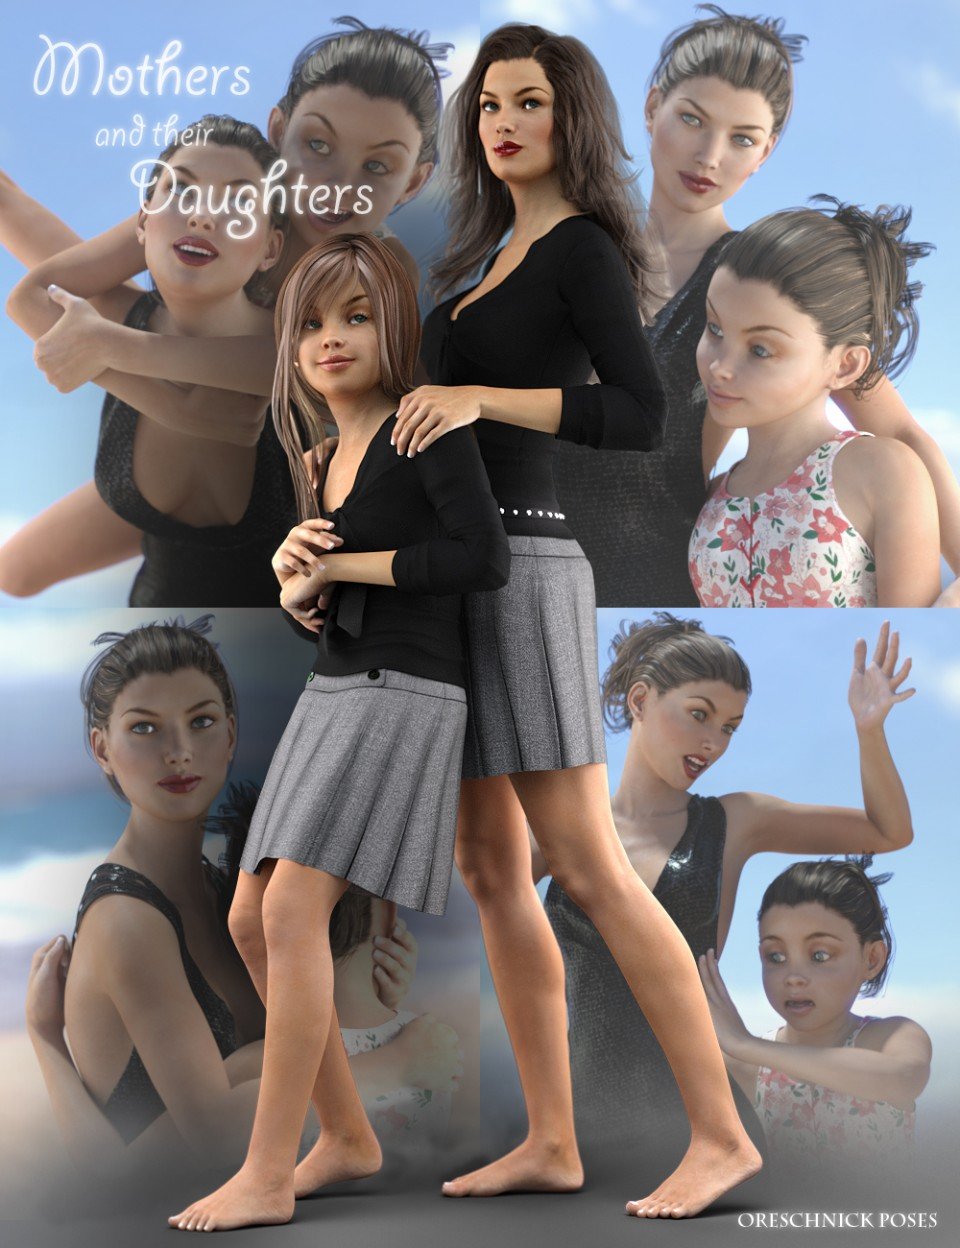 Oreschnick Poses: Mothers and their Daughters Poses G2F G3F_DAZ3D下载站